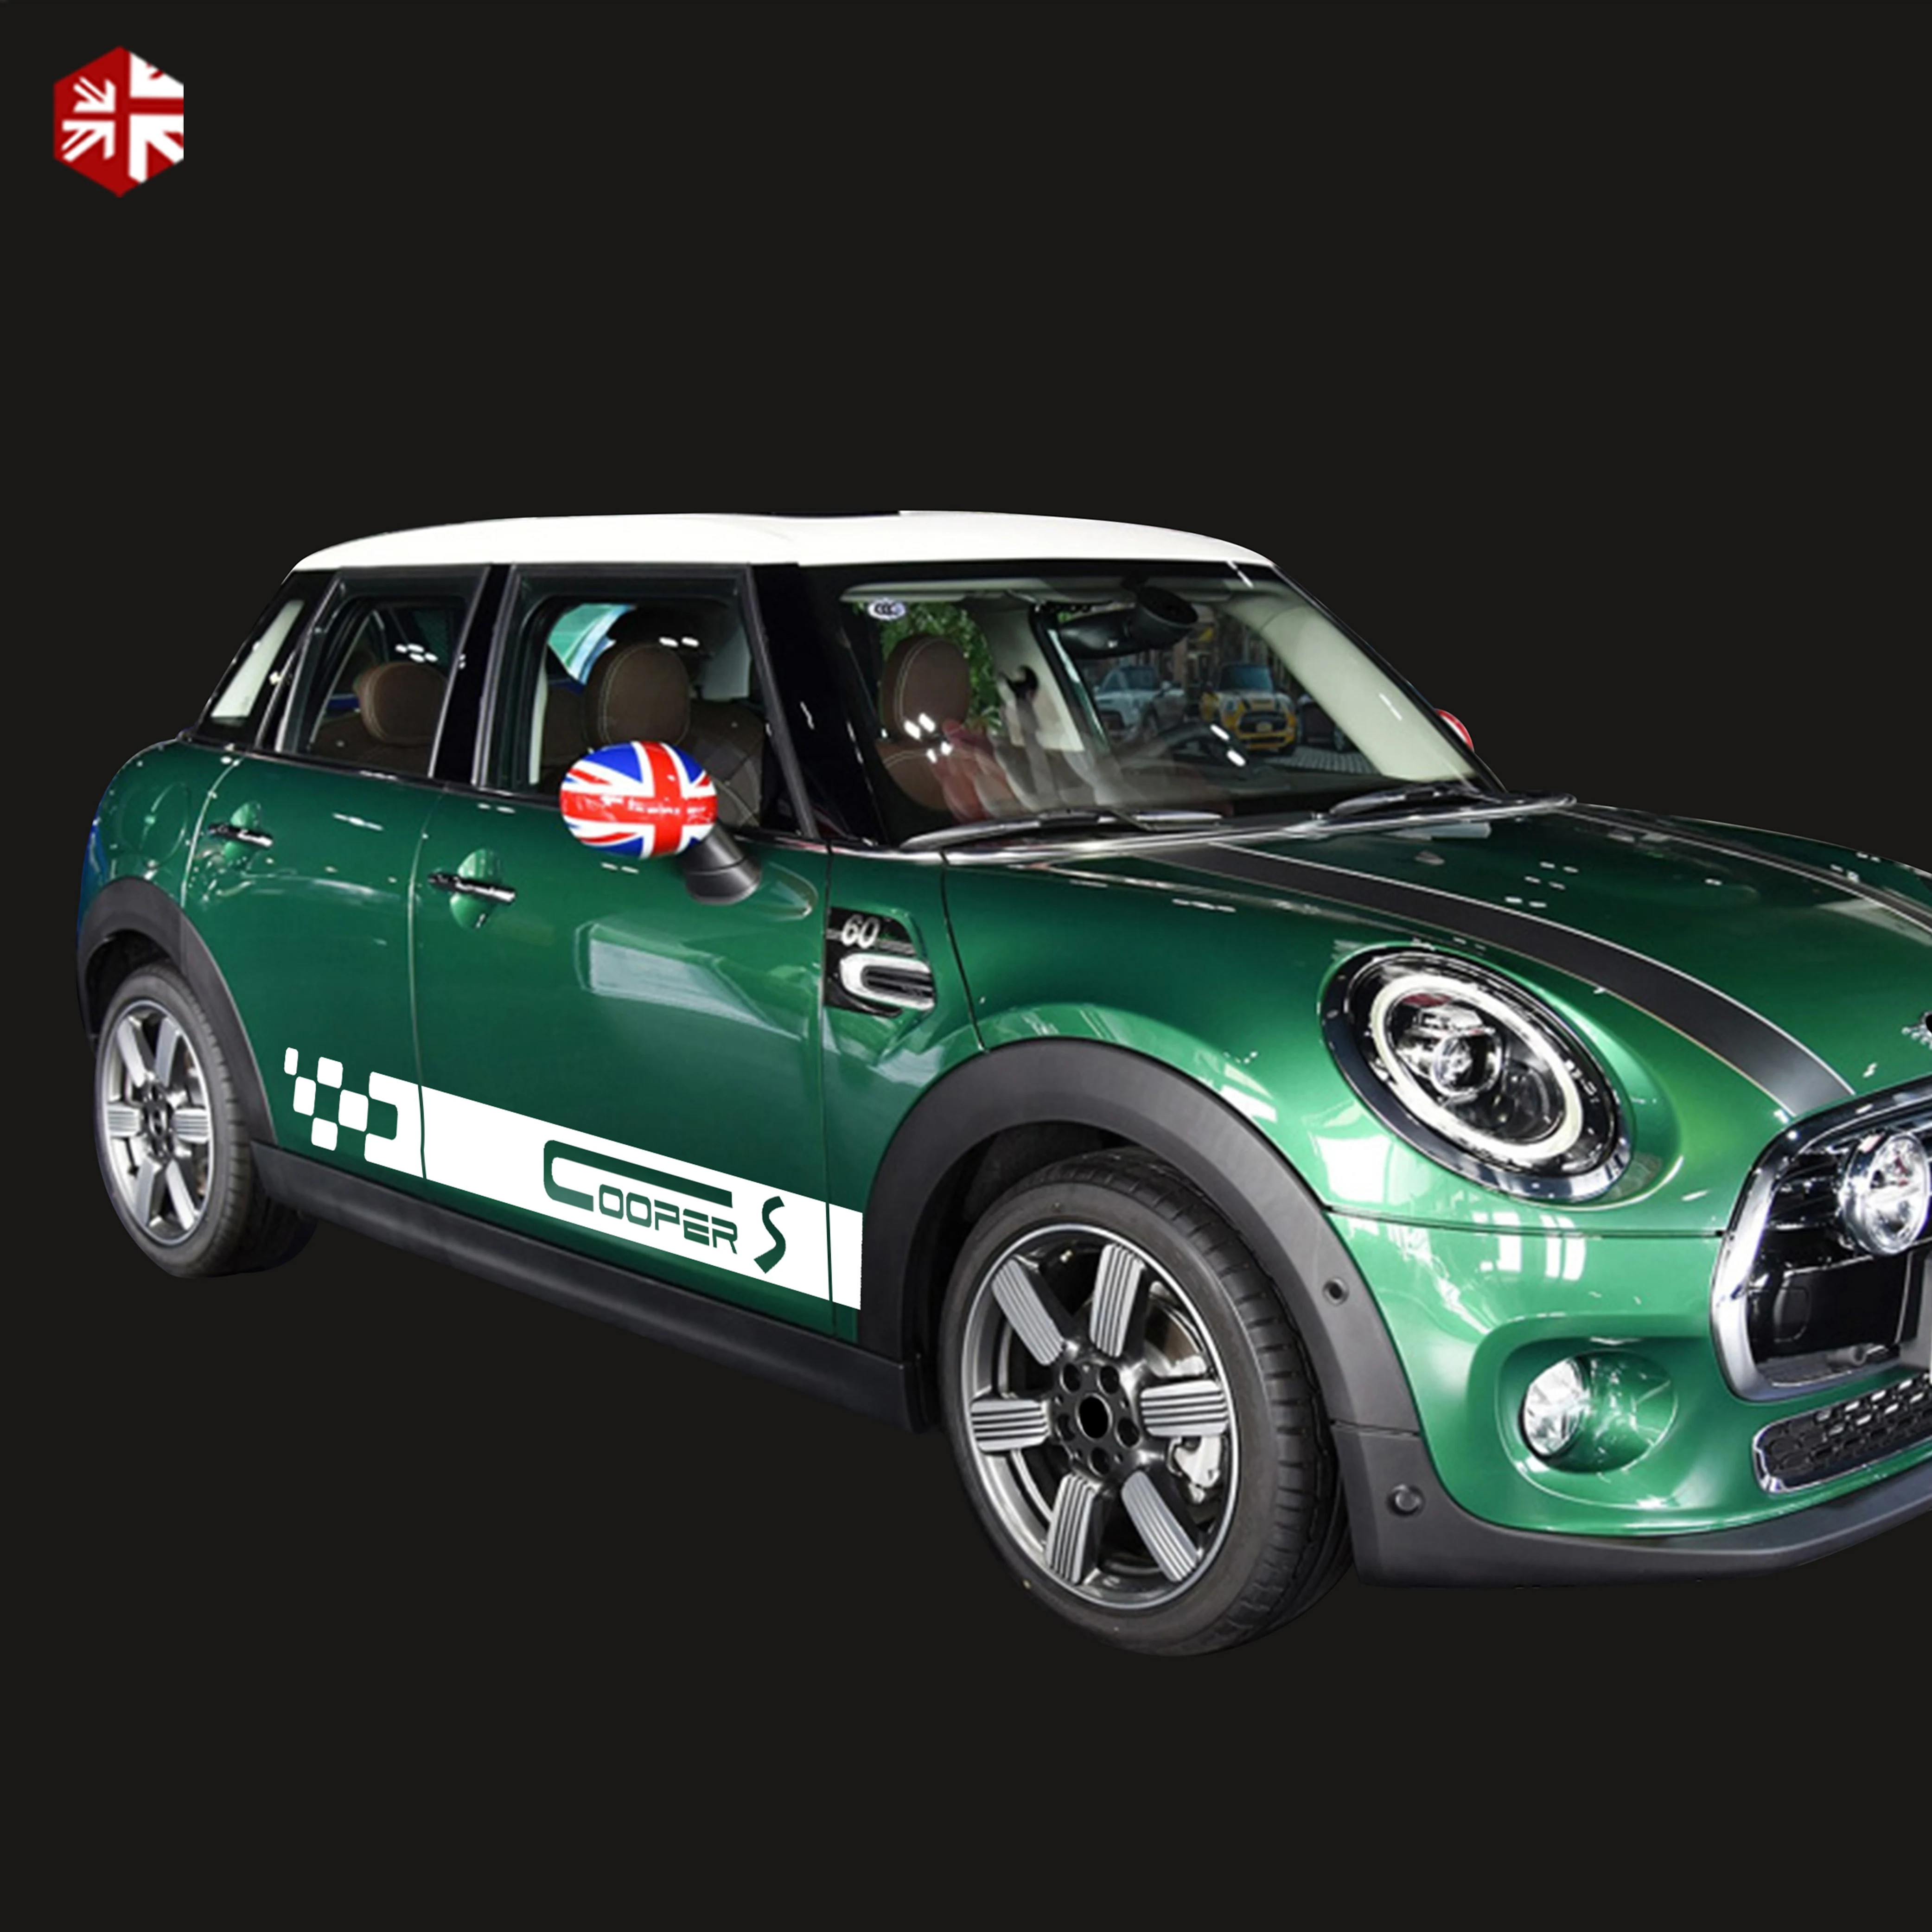 2 Pcs Car Door Side Stripes Sticker Racing Stripes Body Decor Vinyl Decal For MINI Cooper S F55 2014-On One JCW Accessories